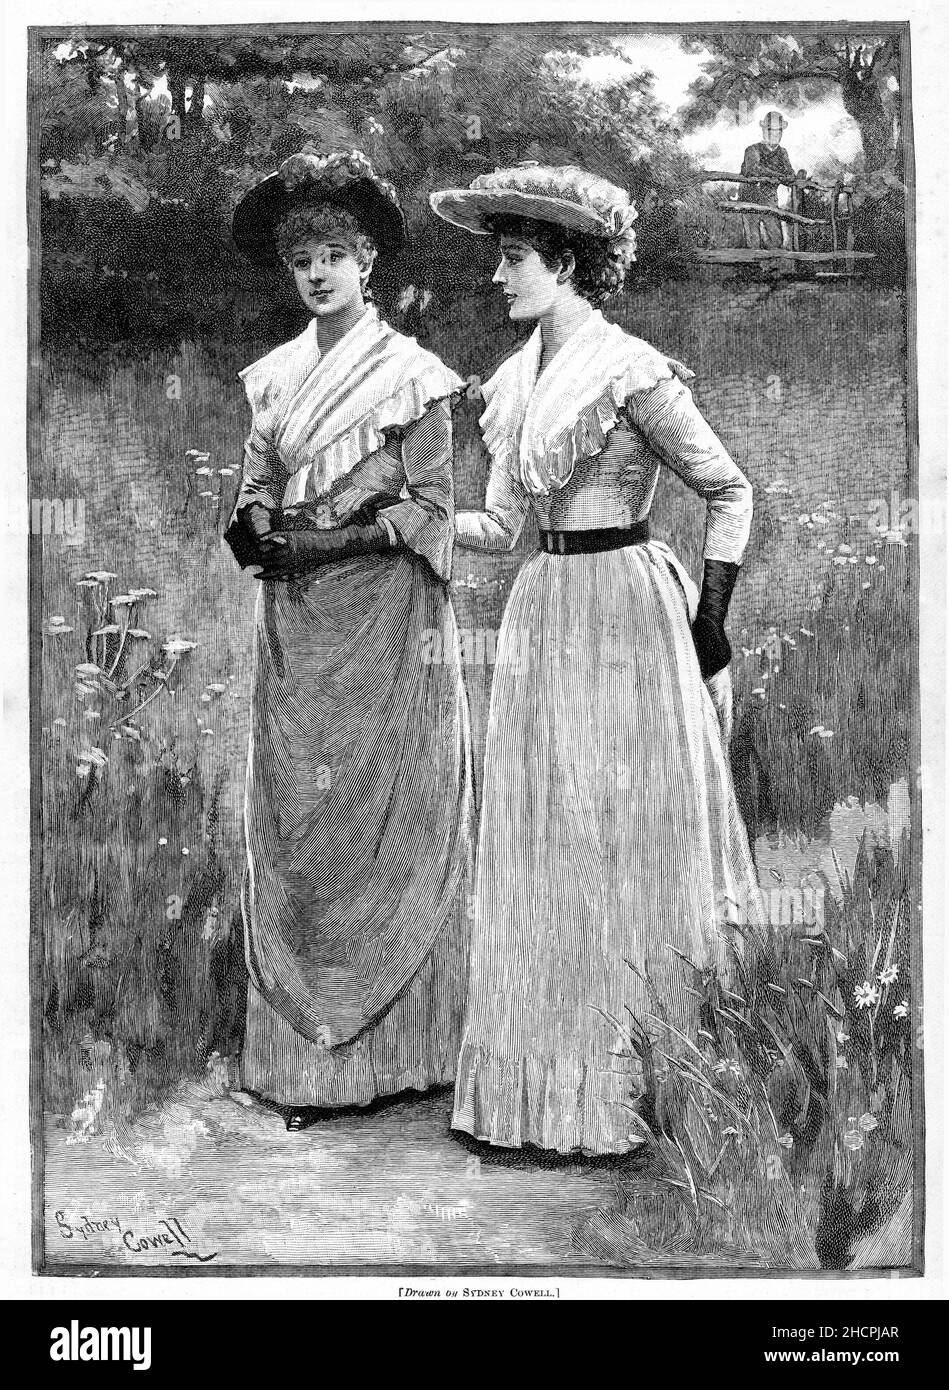 Engraving of two Victorian era women, published 1892 Stock Photo